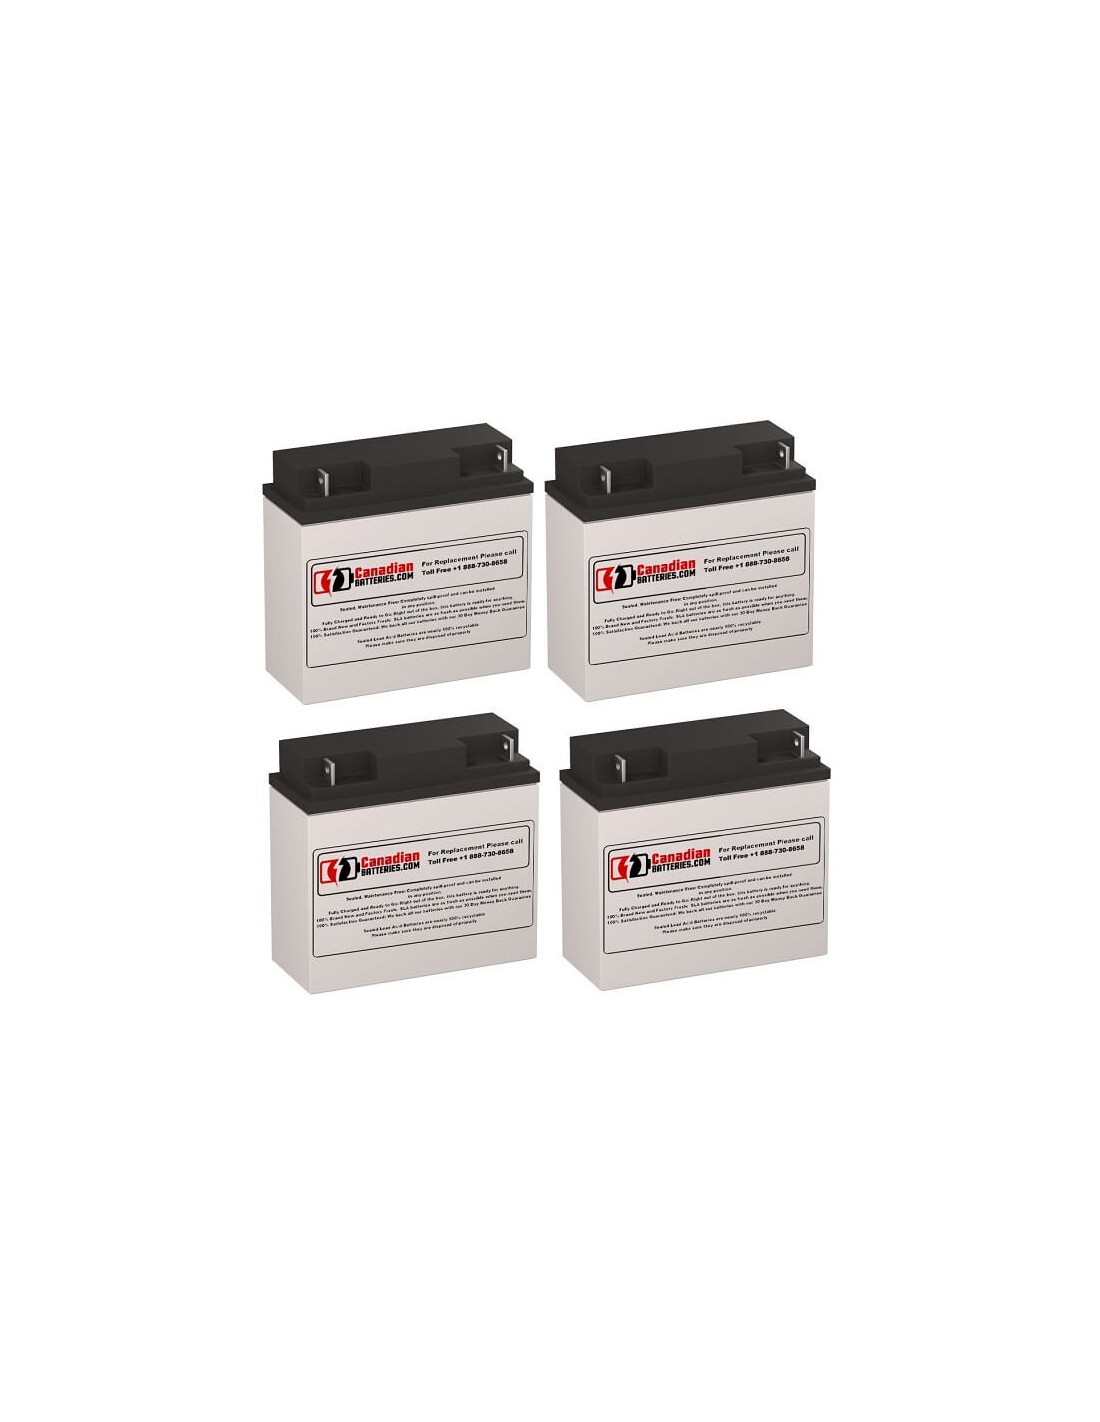 Batteries for Hp Btry1748 UPS, 4 x 12V, 18Ah - 216Wh